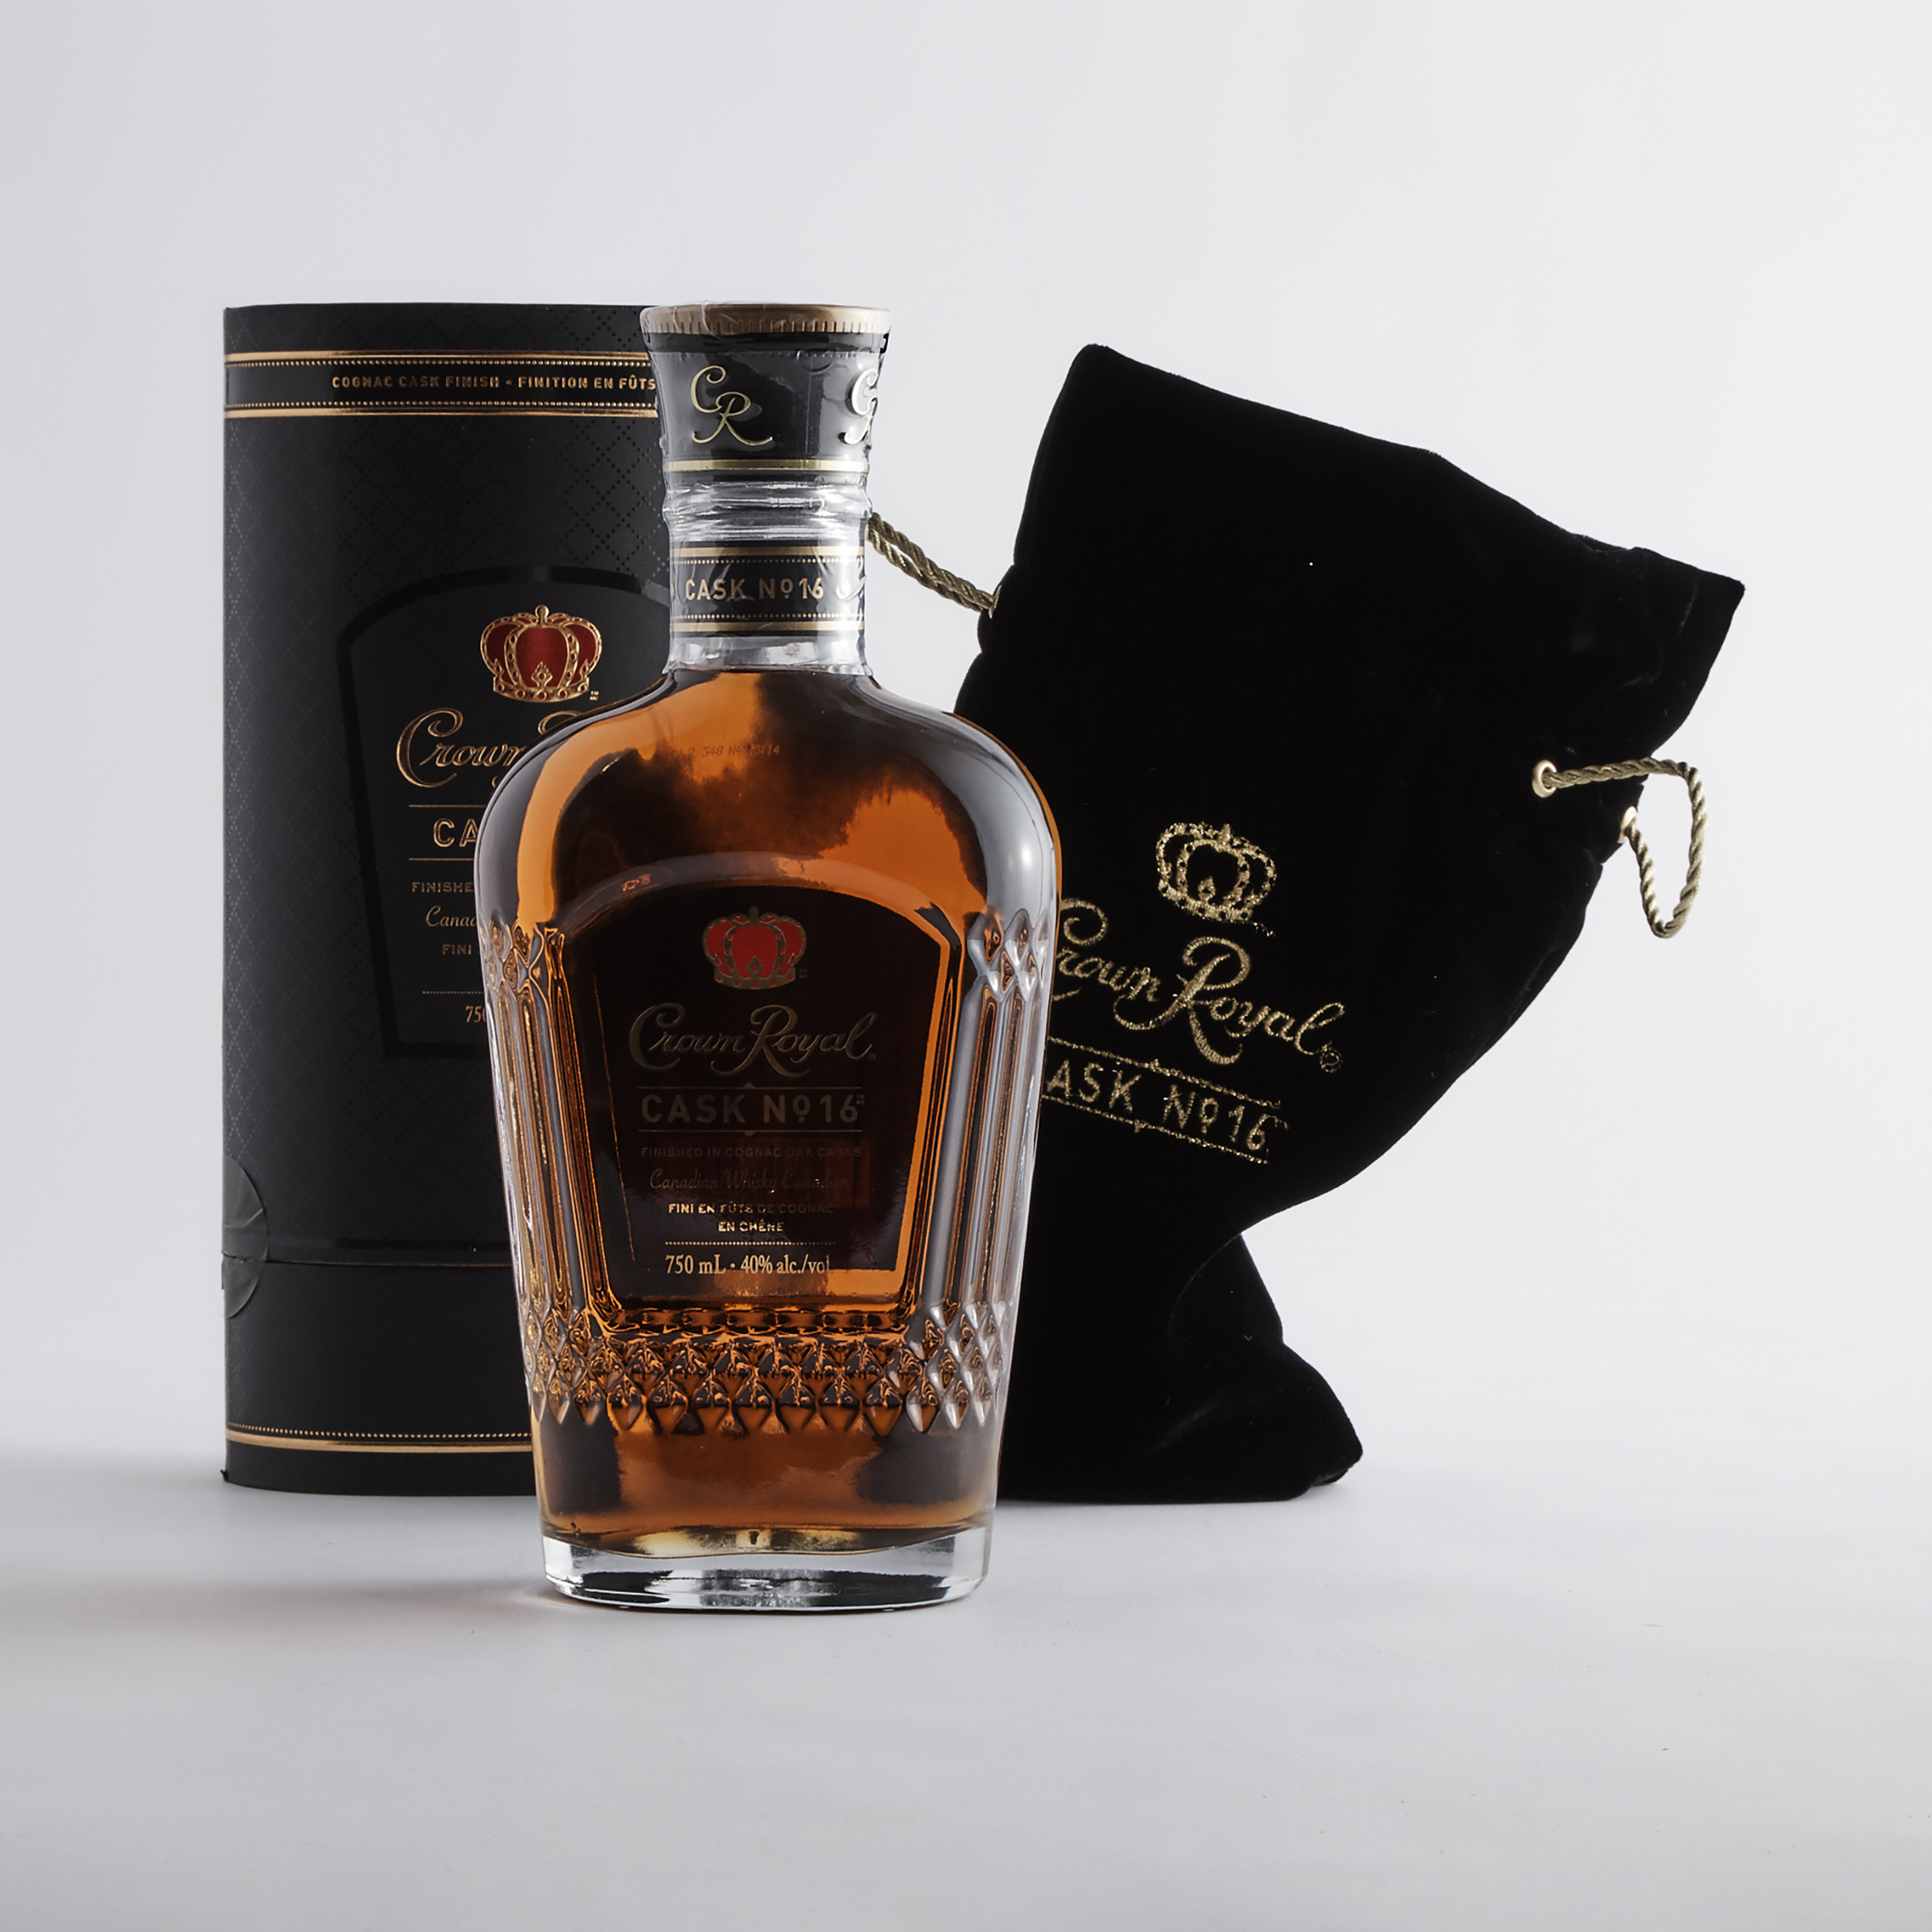 CROWN ROYAL BLENDED CANADIAN WHISKY CASK NO 16 (ONE 750 ML)